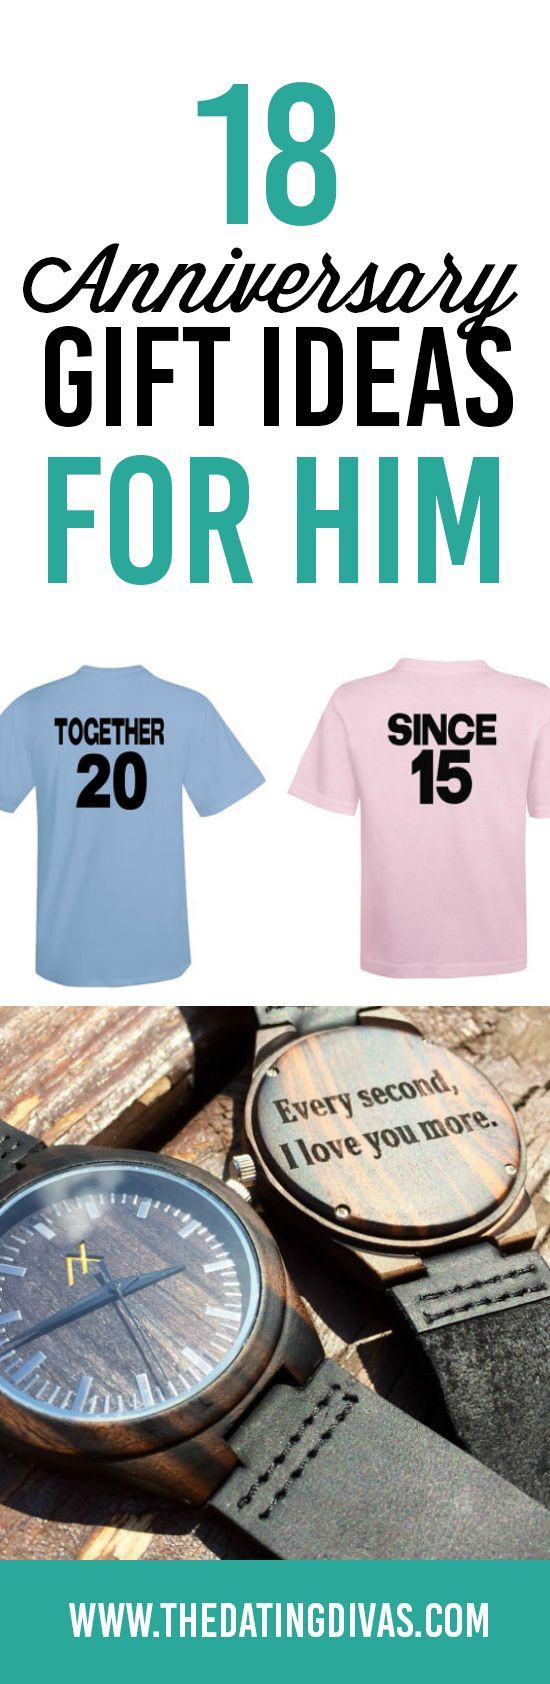 Creative Anniversary Gift Ideas For Him
 672 best Anniversary Ideas images on Pinterest